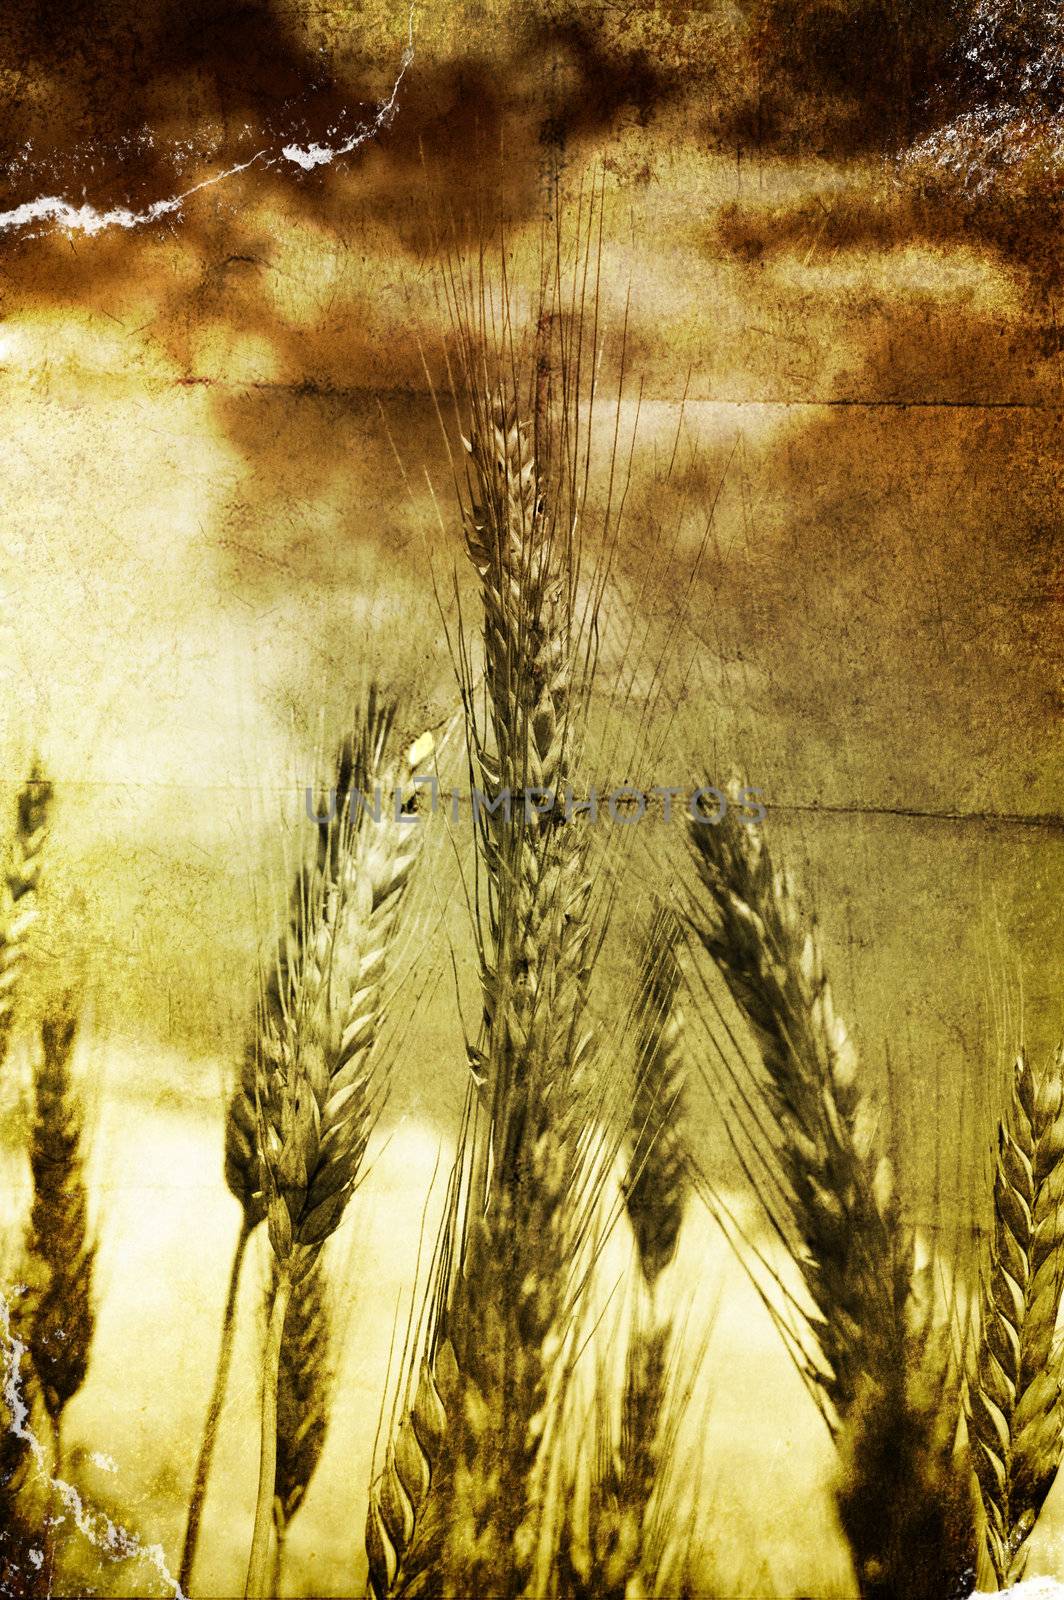 A grunge and yellow field of grain